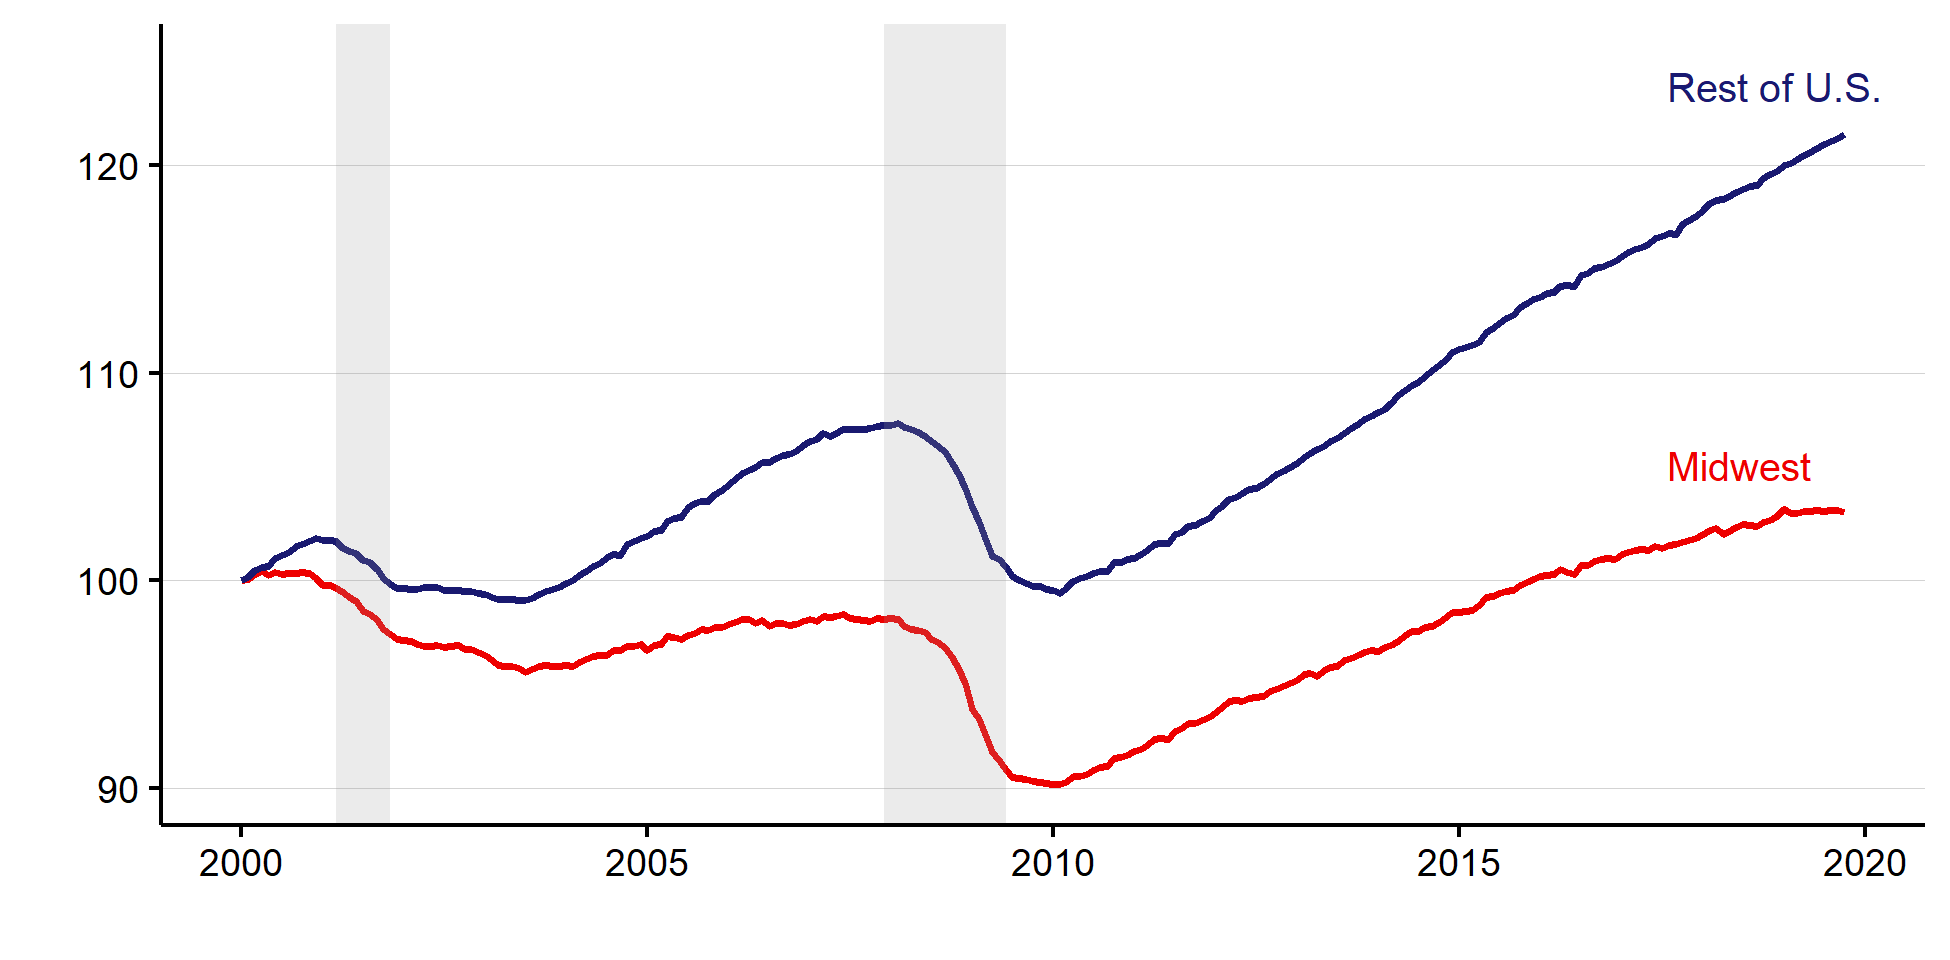 There has been a strong negative relationship between manufacturing concentration and employment growth.